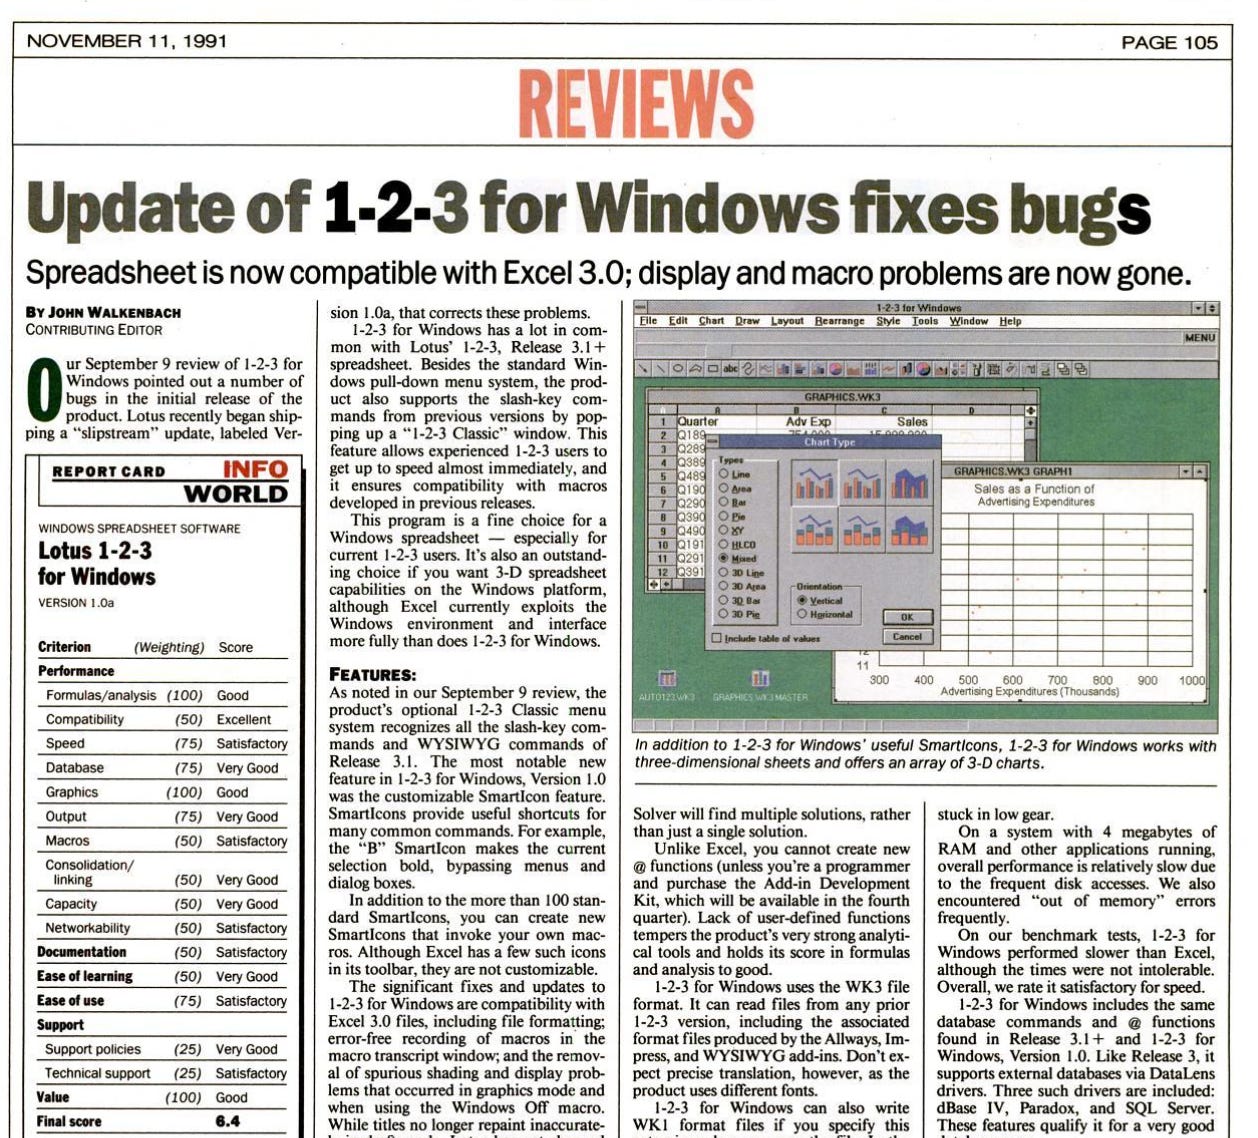 Update of 1-2-3 for Windows fixes bugs.